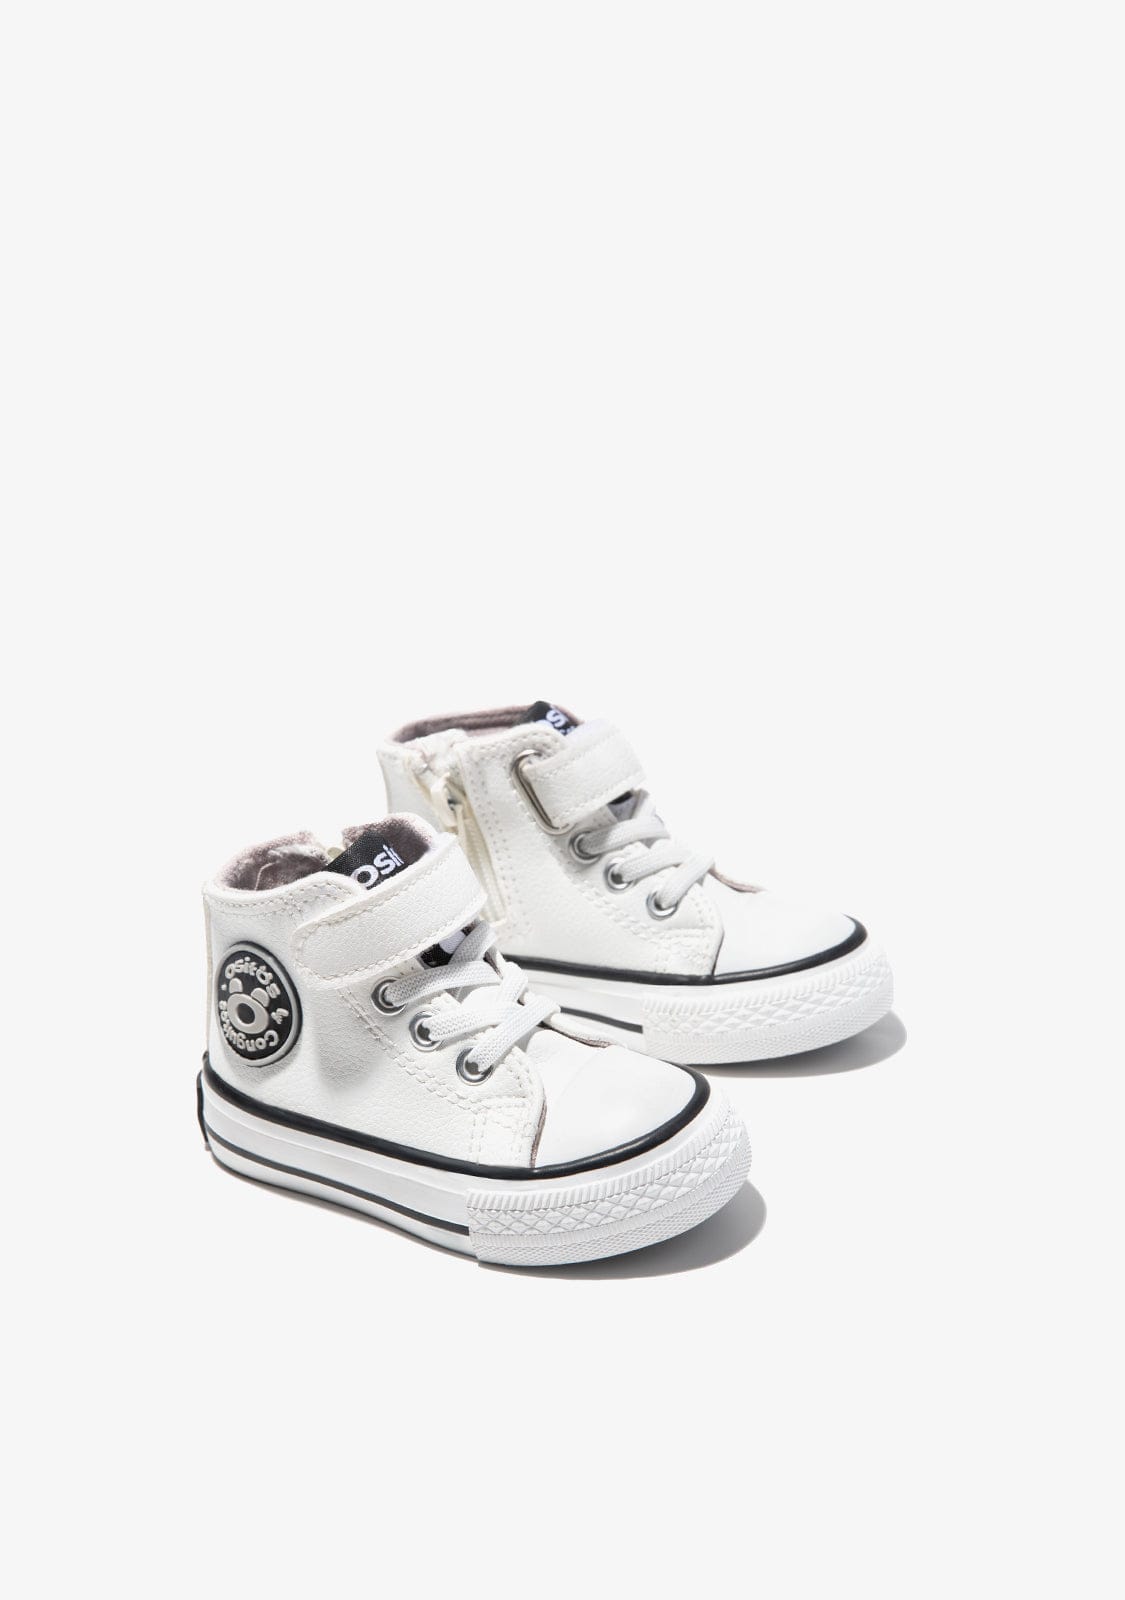 OSITO Shoes Baby's White Adherent Strip Hi-Top Sneakers Napa